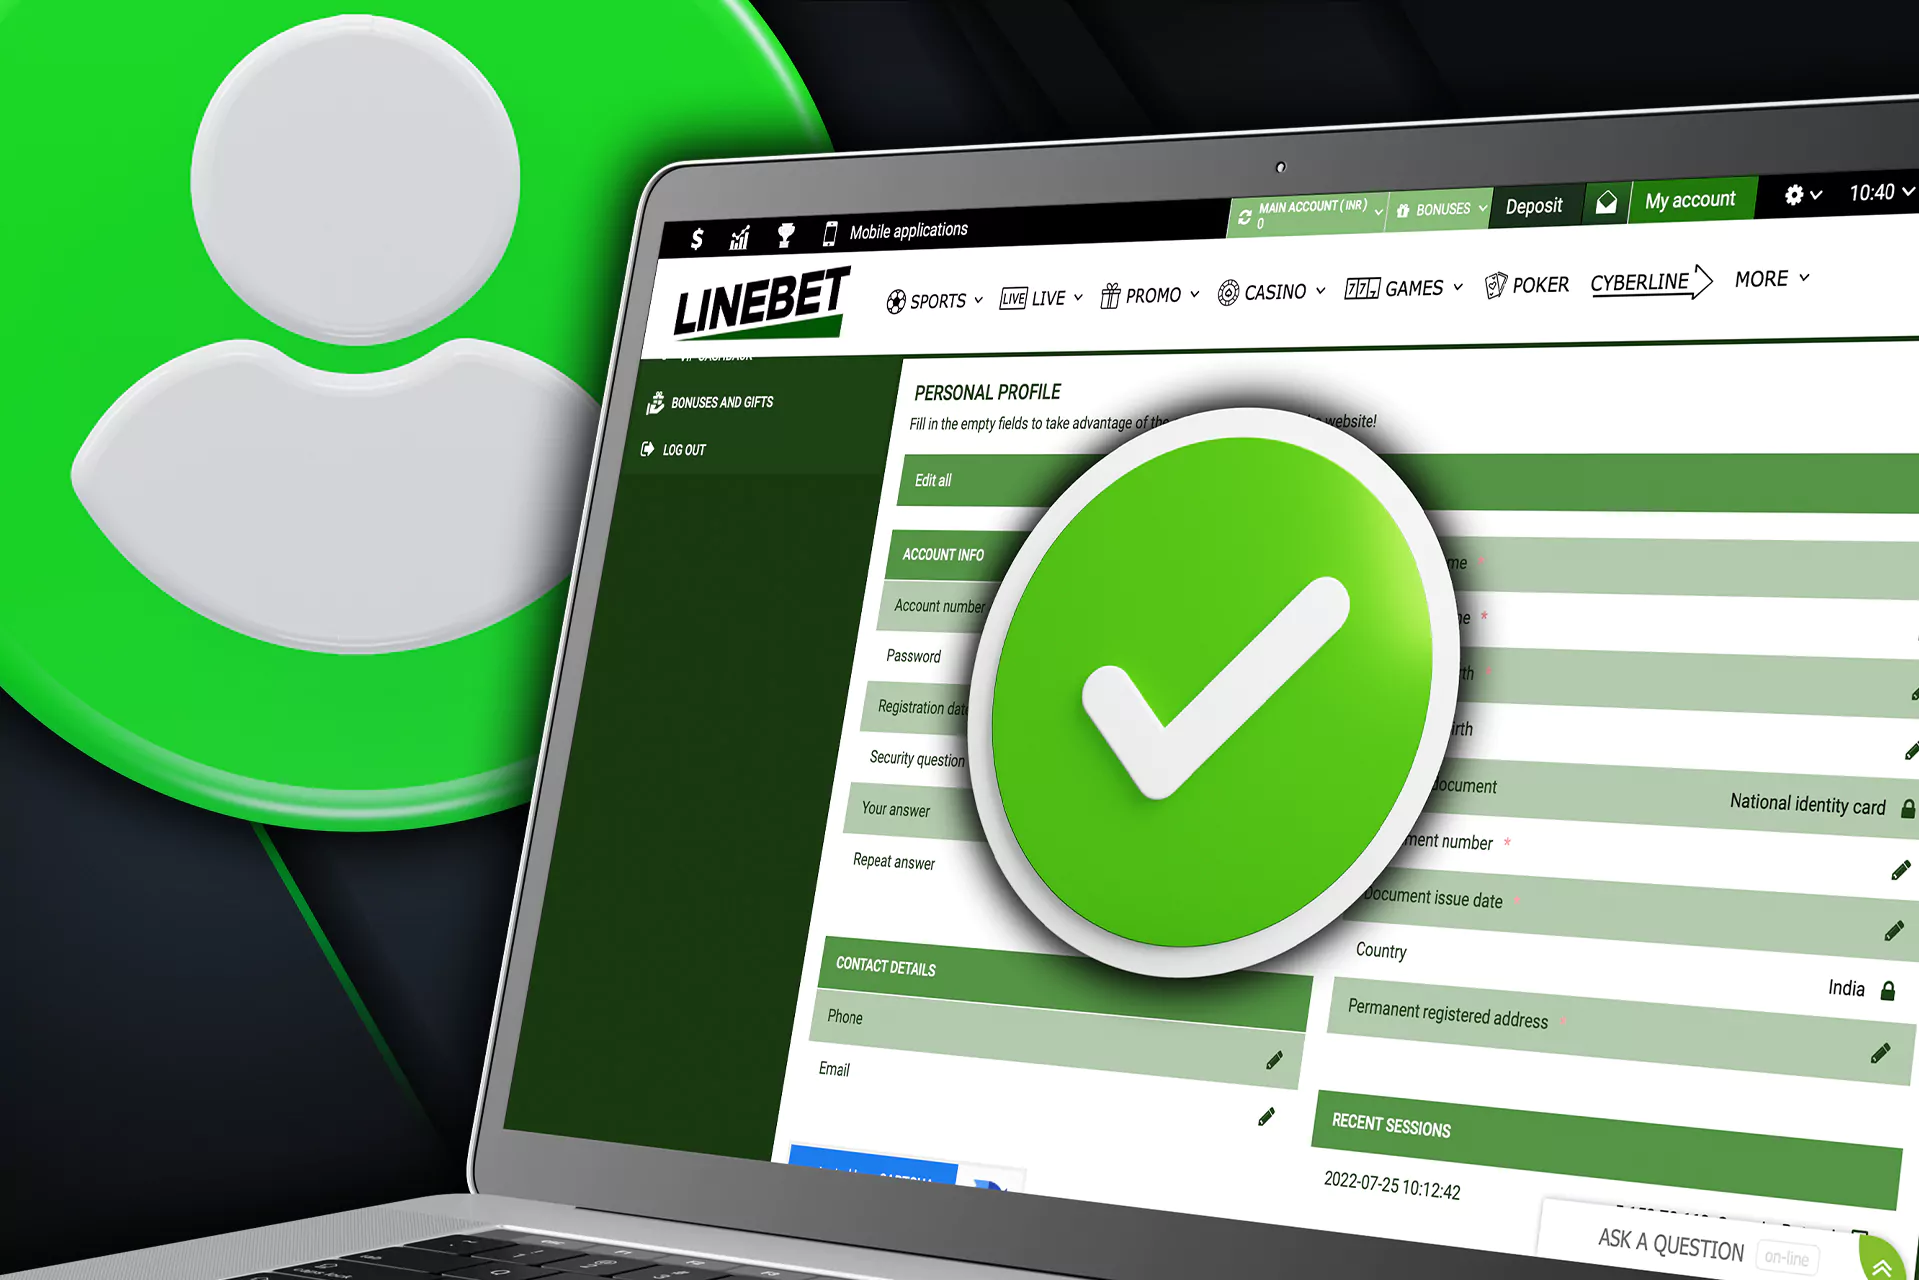 Verify your account to be protected by Linebet and withdraw winnings safely.